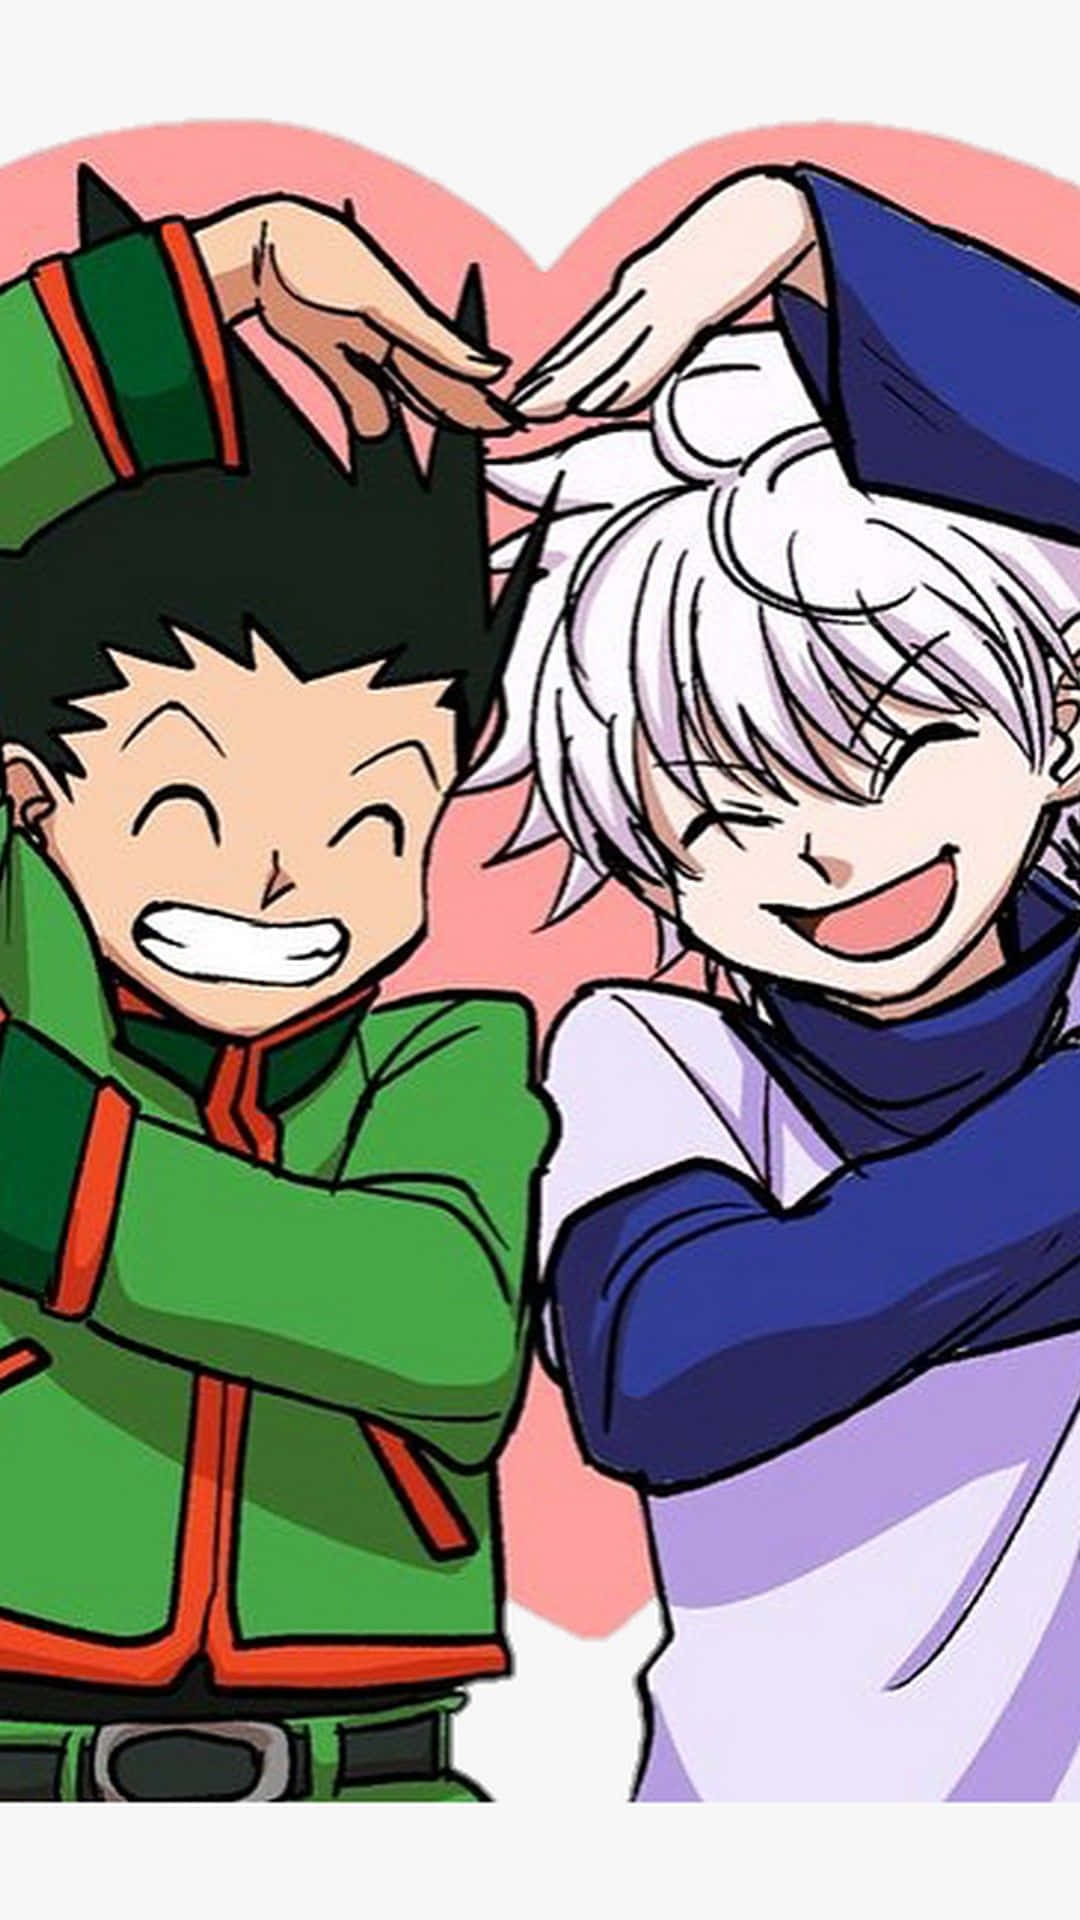 Join Gon and Killua on their Quest Wallpaper